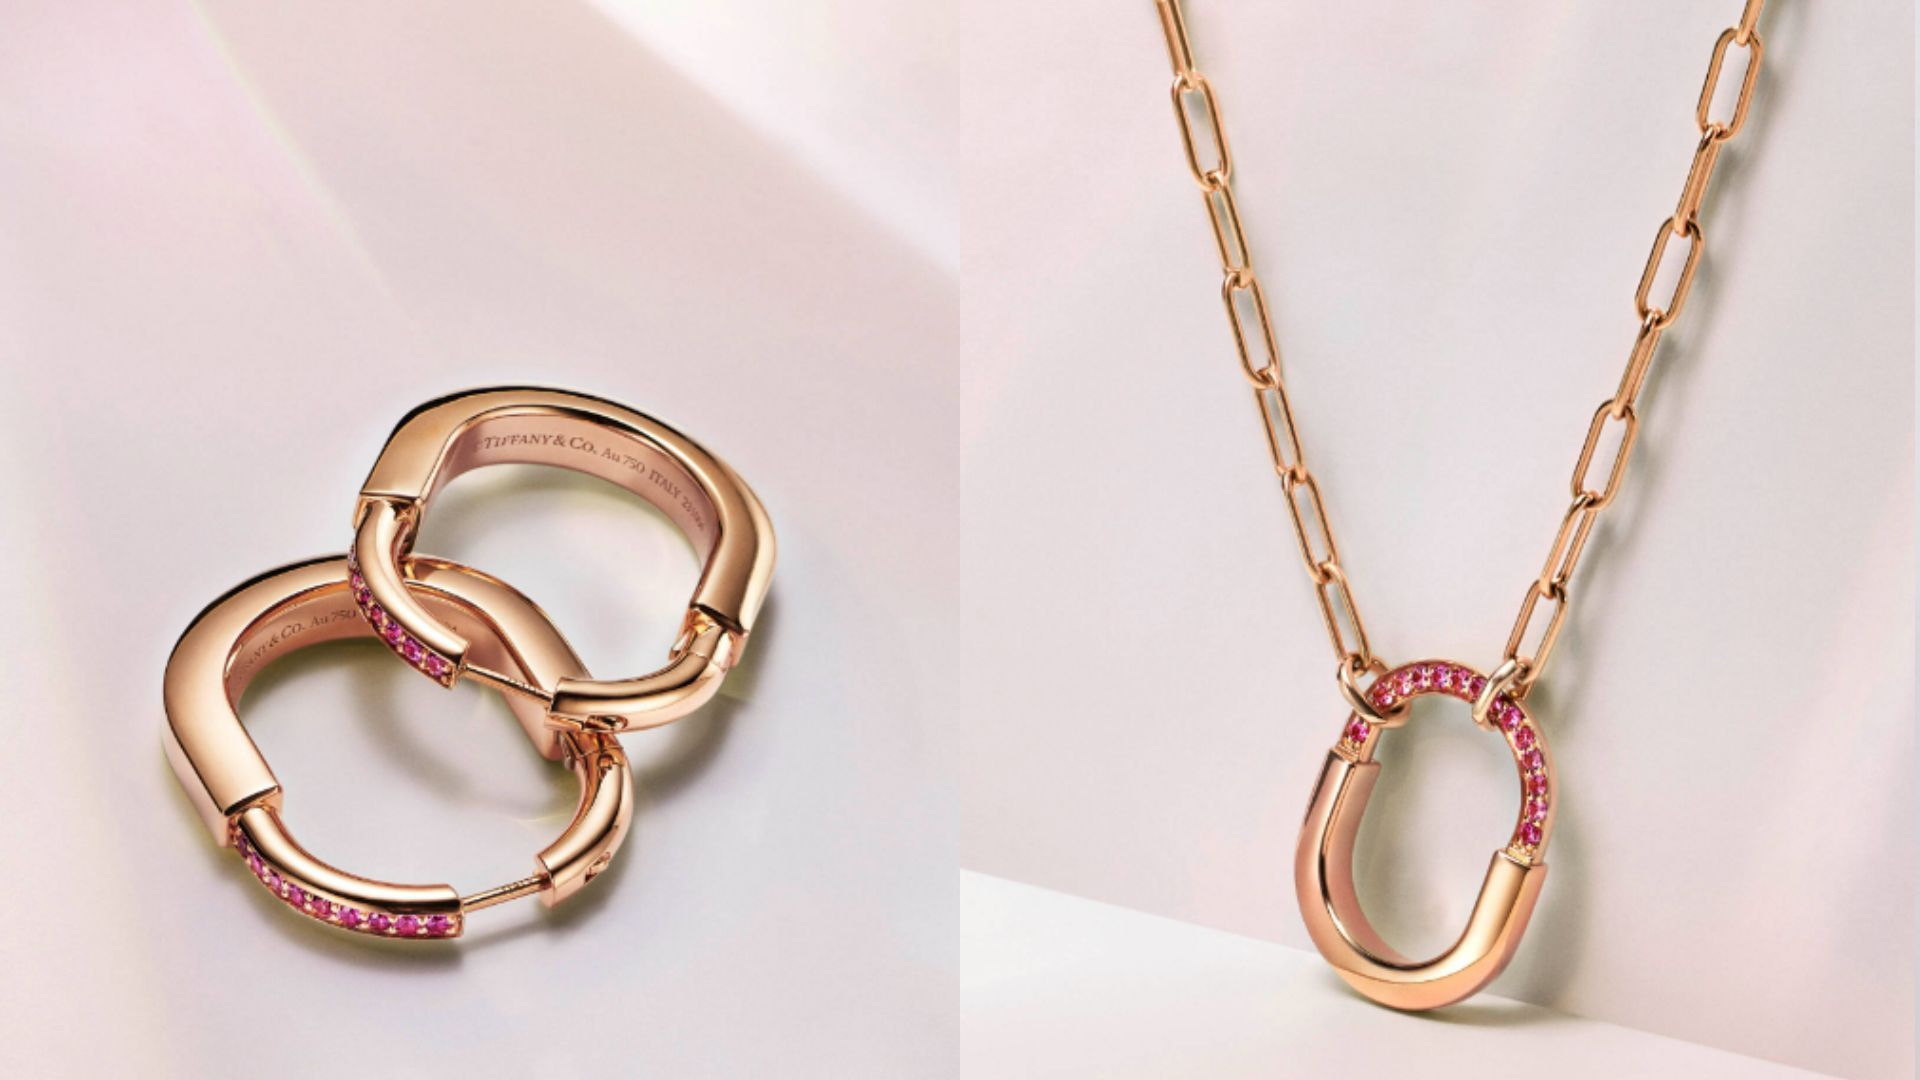 Tiffany & Co. launches BLACKPINK's Rosé-inspired Lock collection